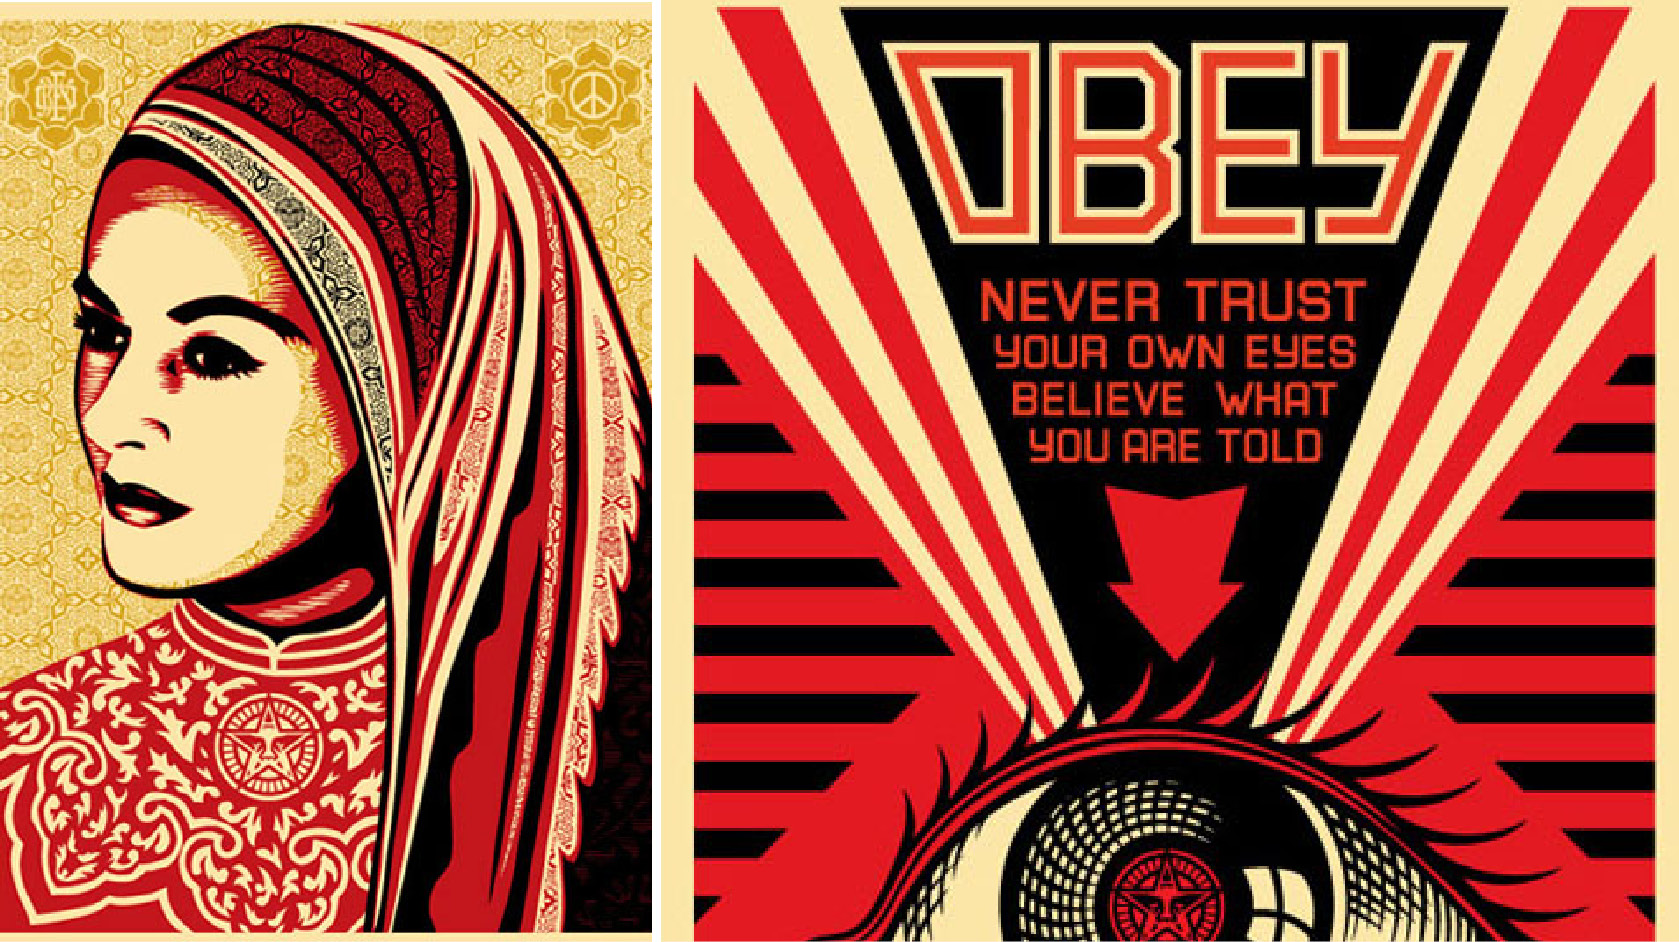 Obey Giant, Never trust your own eyes – Comart Design